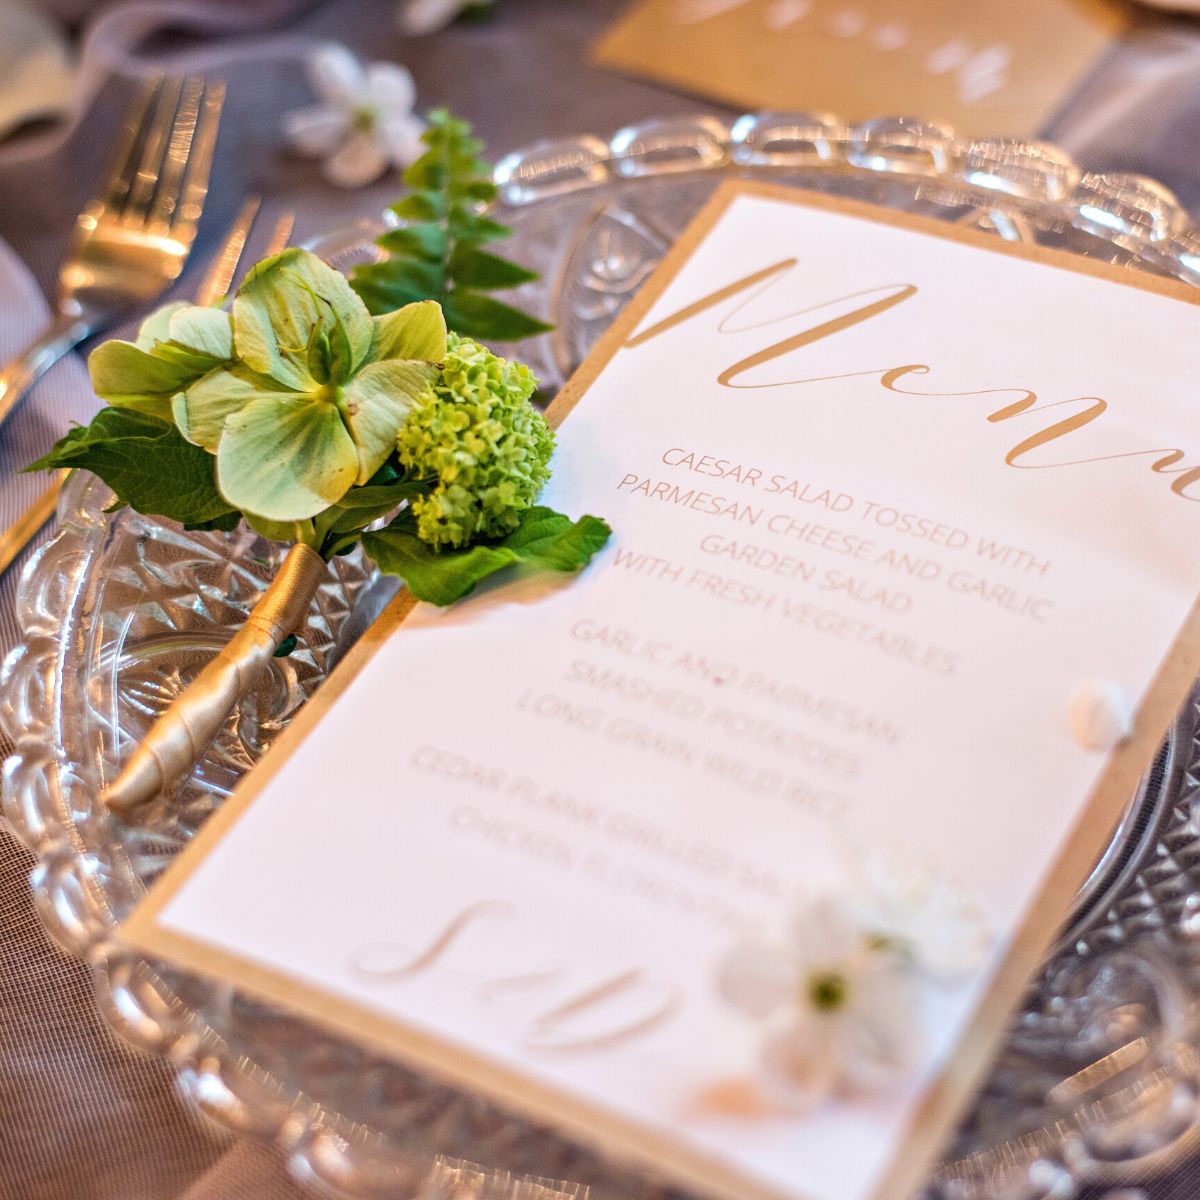 A printed menu on a glass plate with a flower corsage next to it.